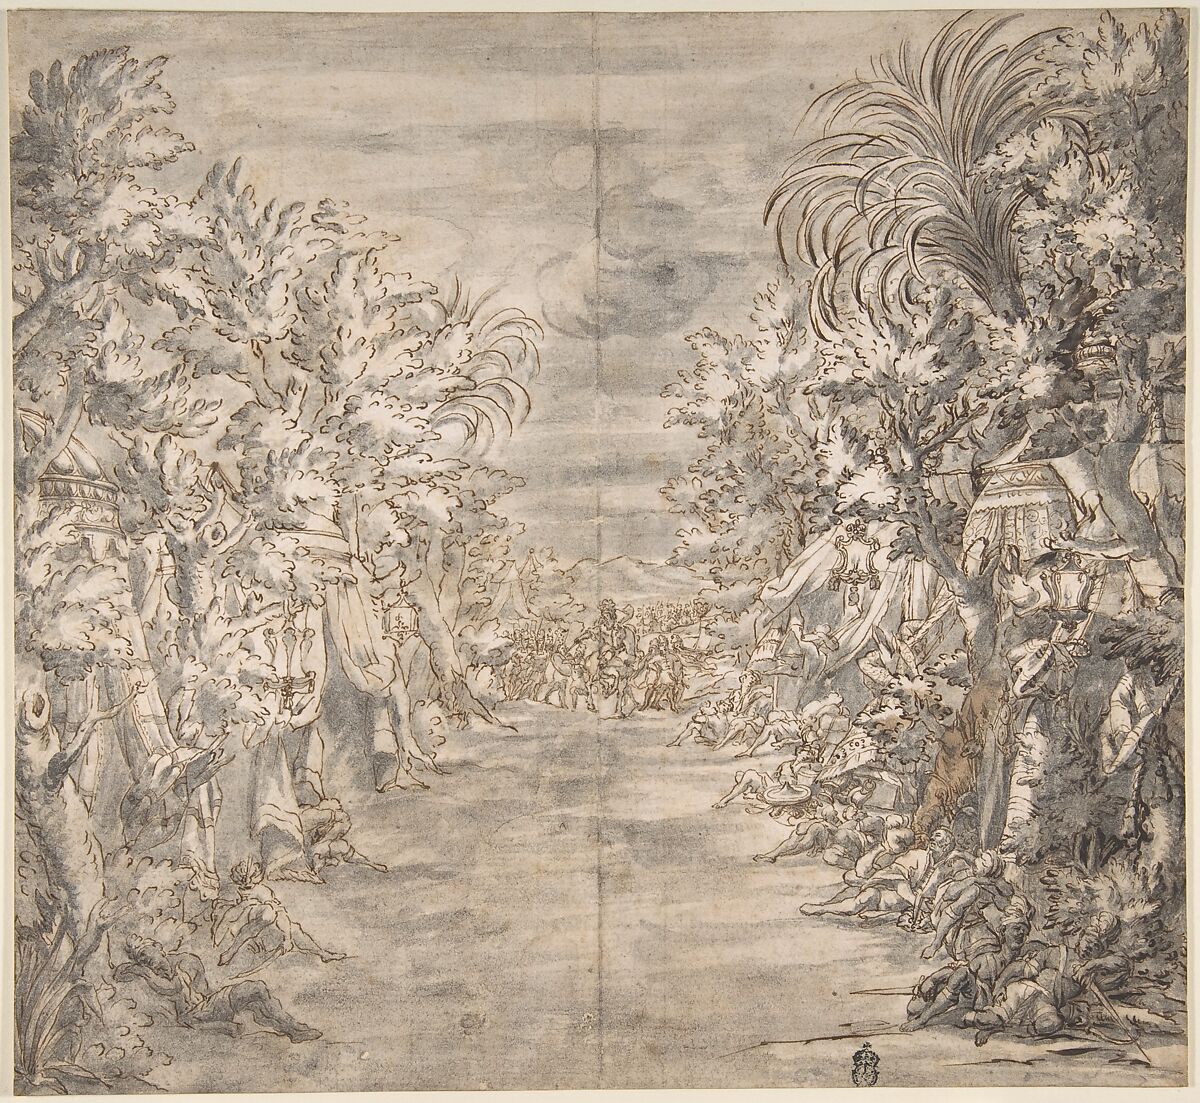 Ornamental Theater Scene with Trees, Anonymous, Italian, 17th or 18th century, Pen and brown ink, brush and gray wash, brush and brown wash, possibly incidental 